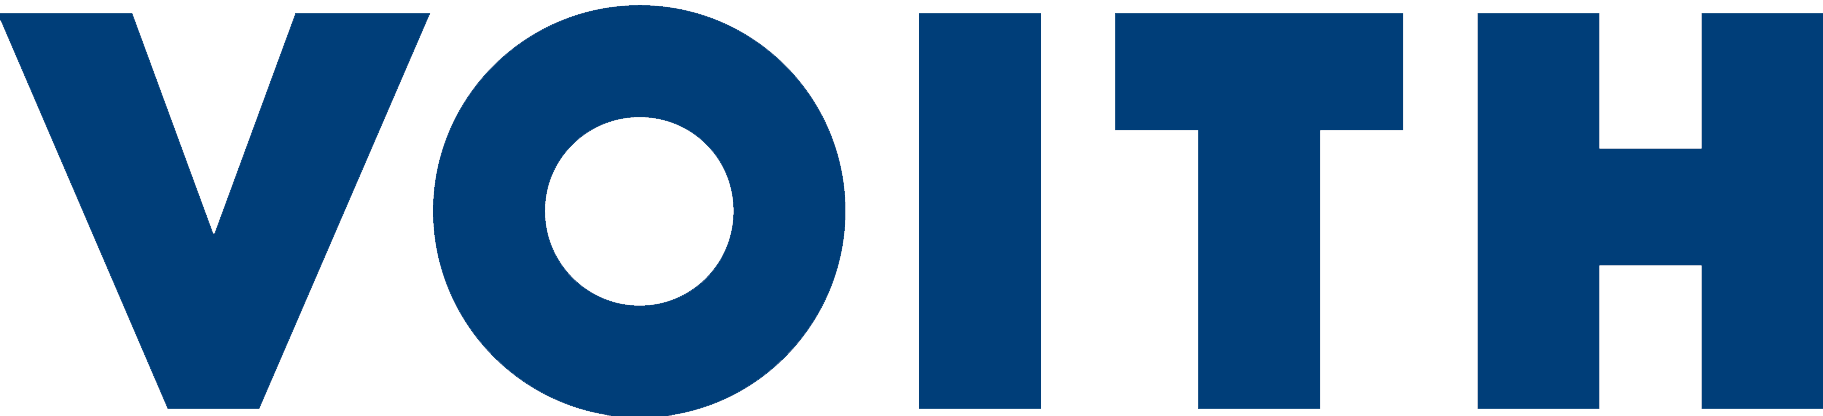 Voith logo_nb.png